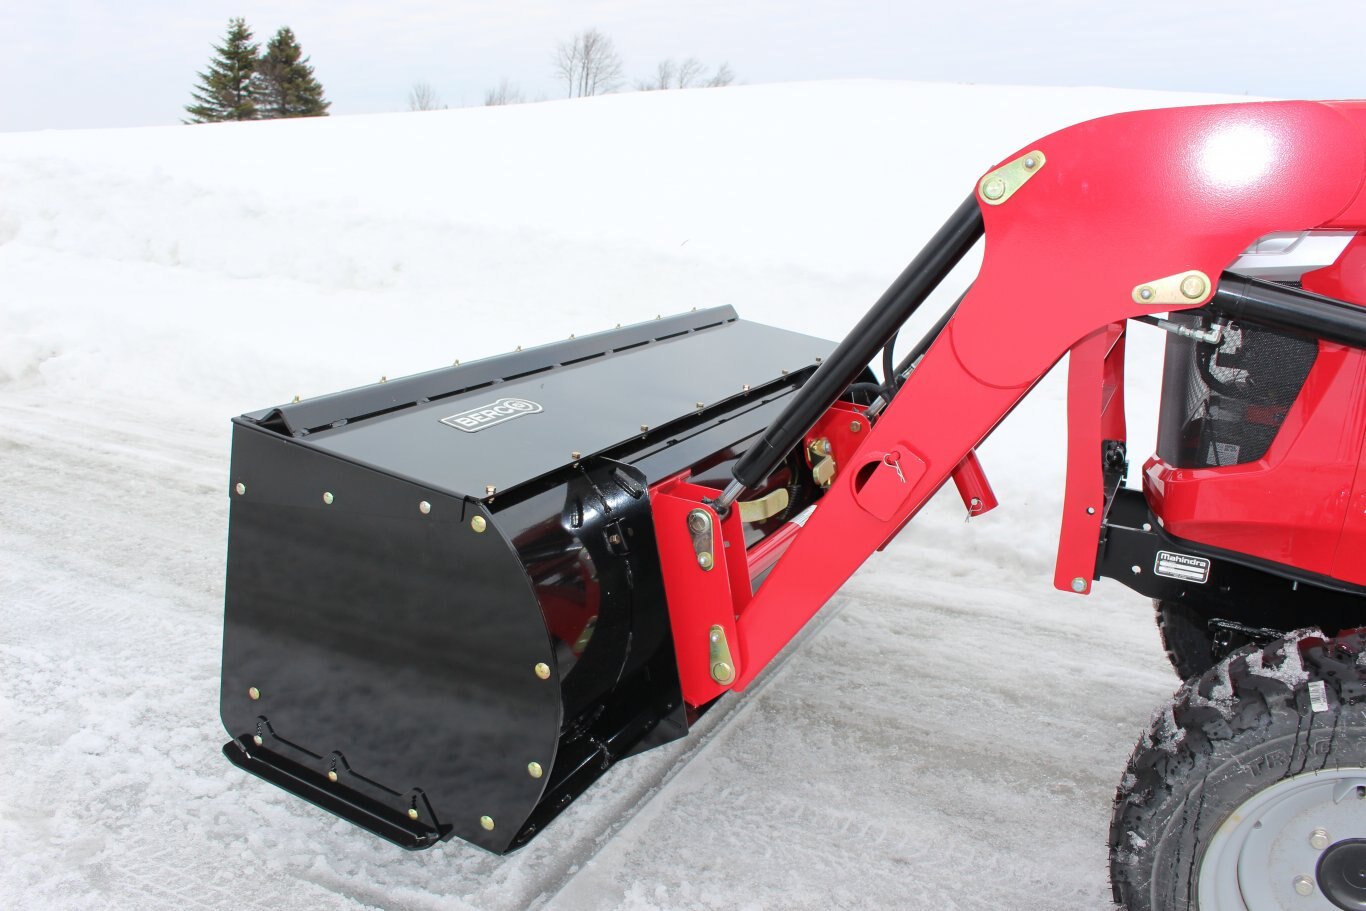 Bercomac Light Duty Snow Push for tractors equipped with Skid Steer style attach